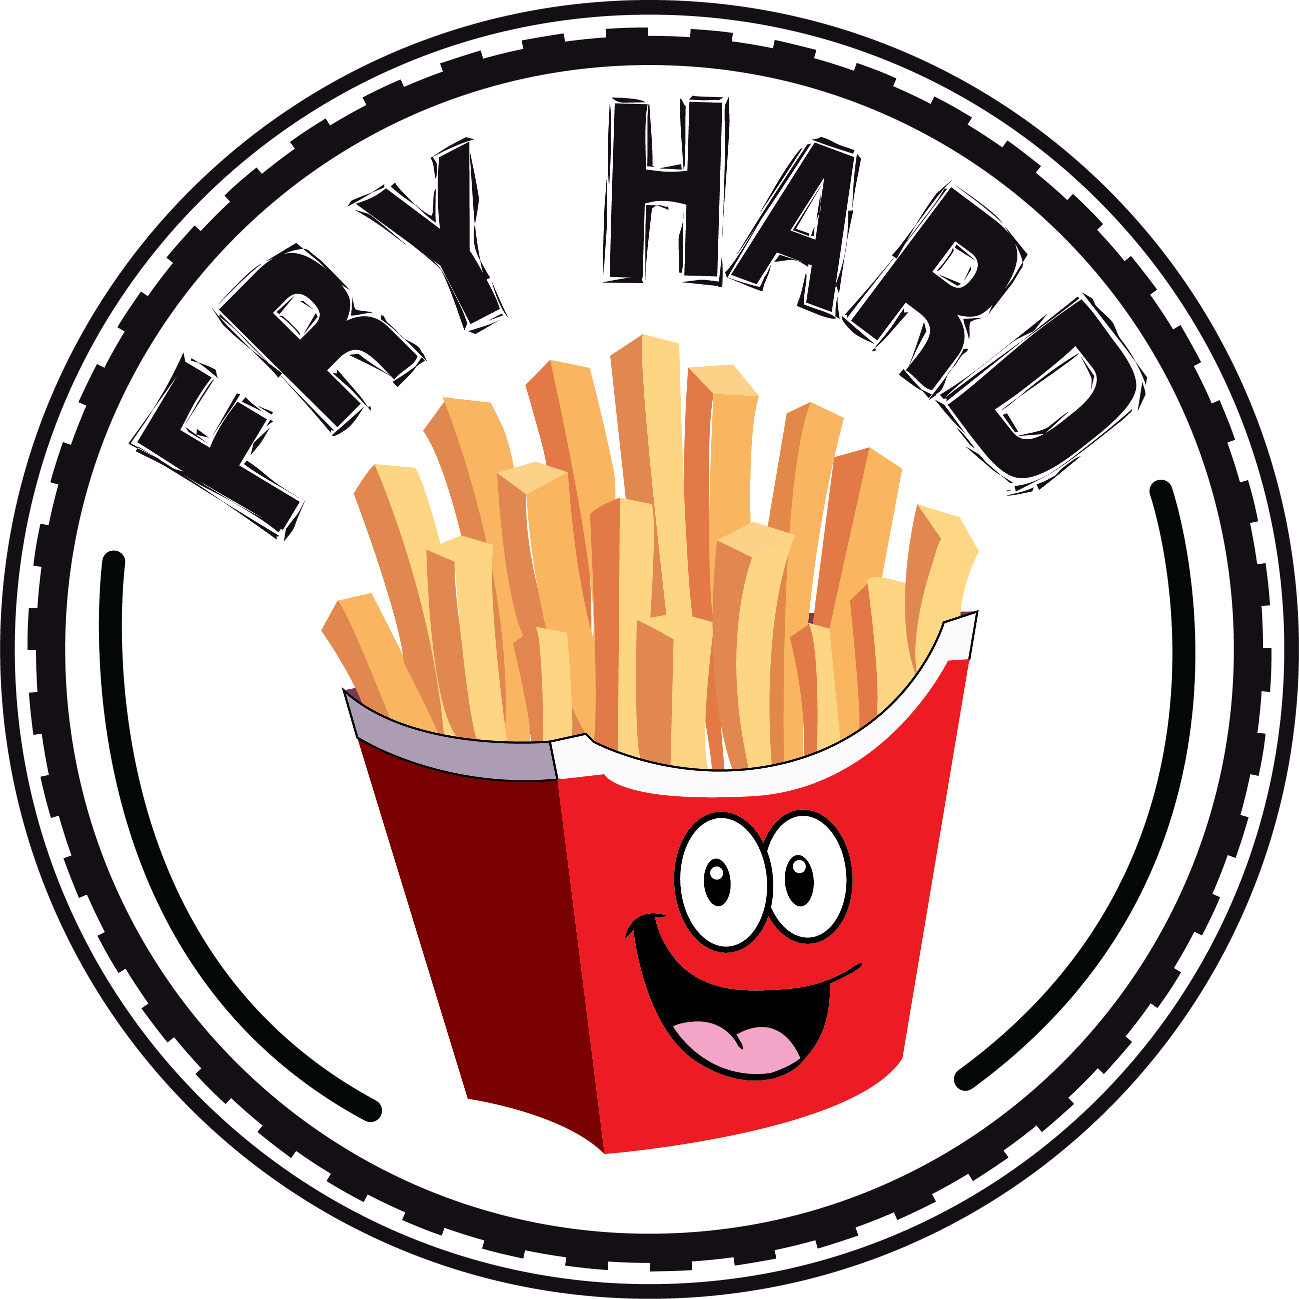 fries clipart fast food bag